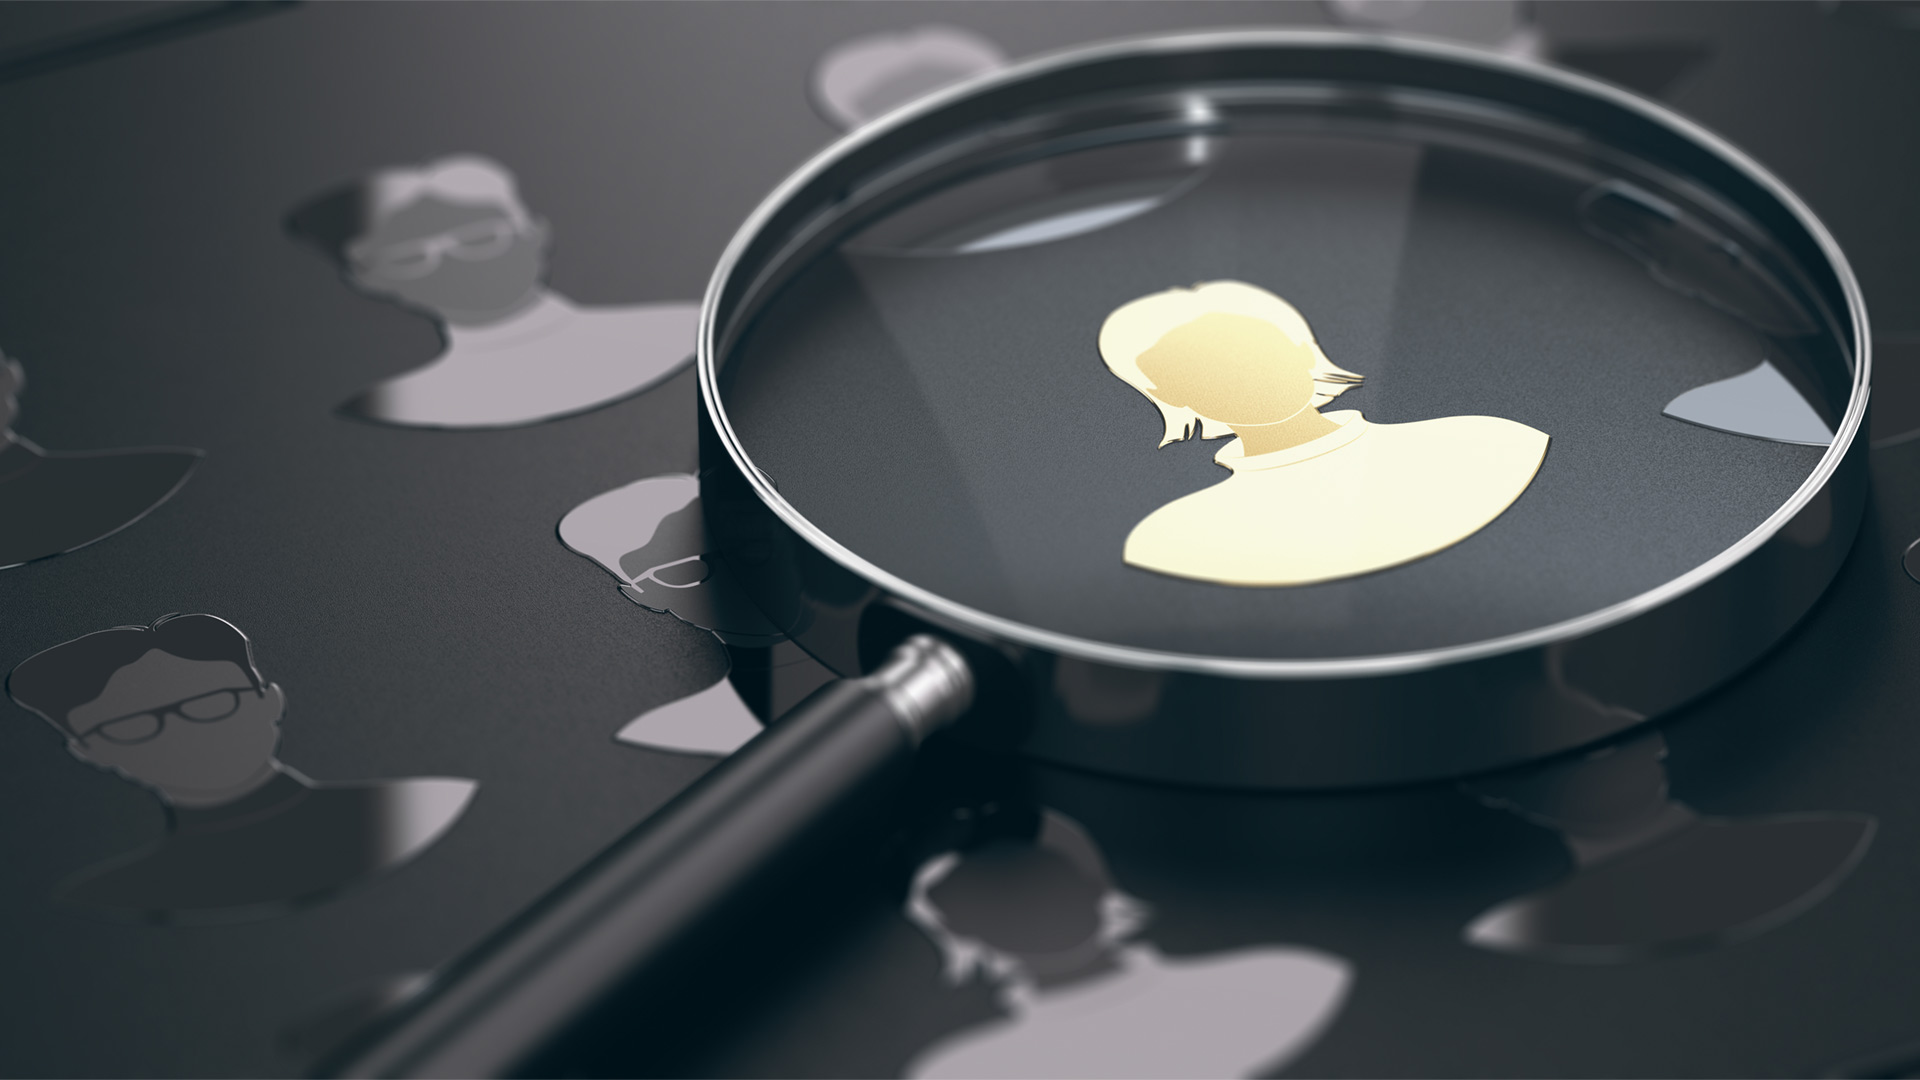 Black background with silhouettes and magnifying glass